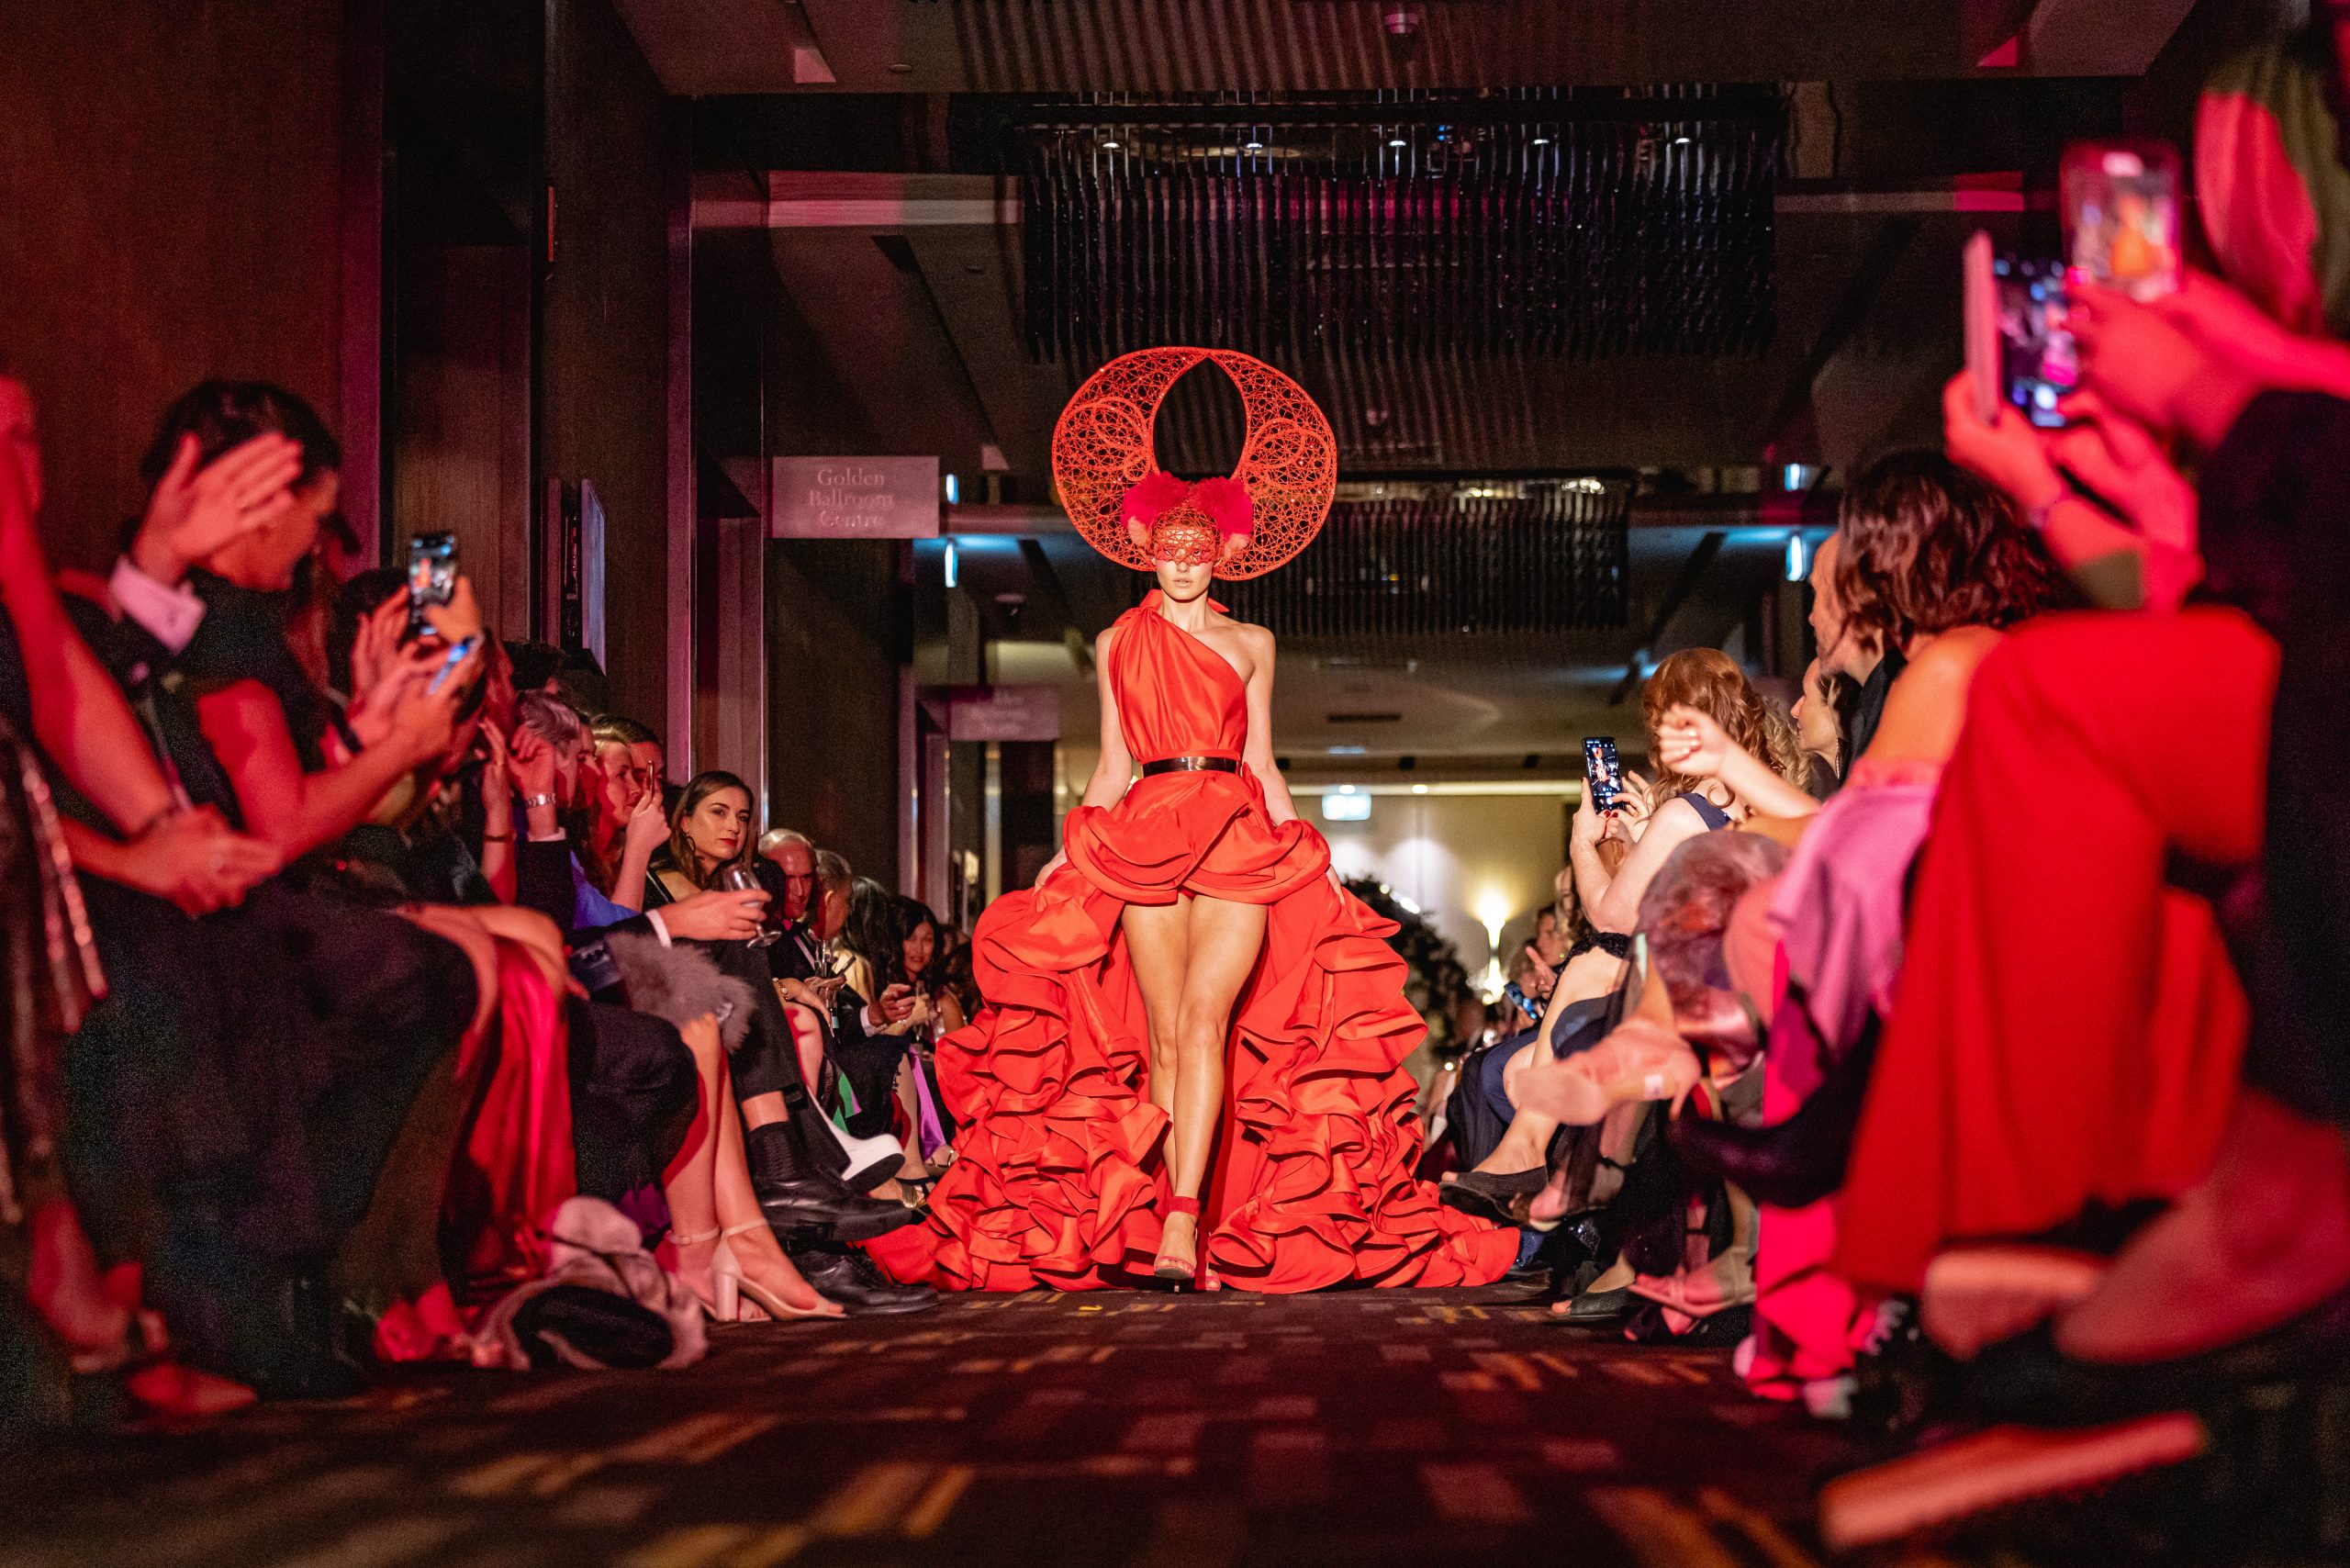 Couture for a Cure raises more than $150,000